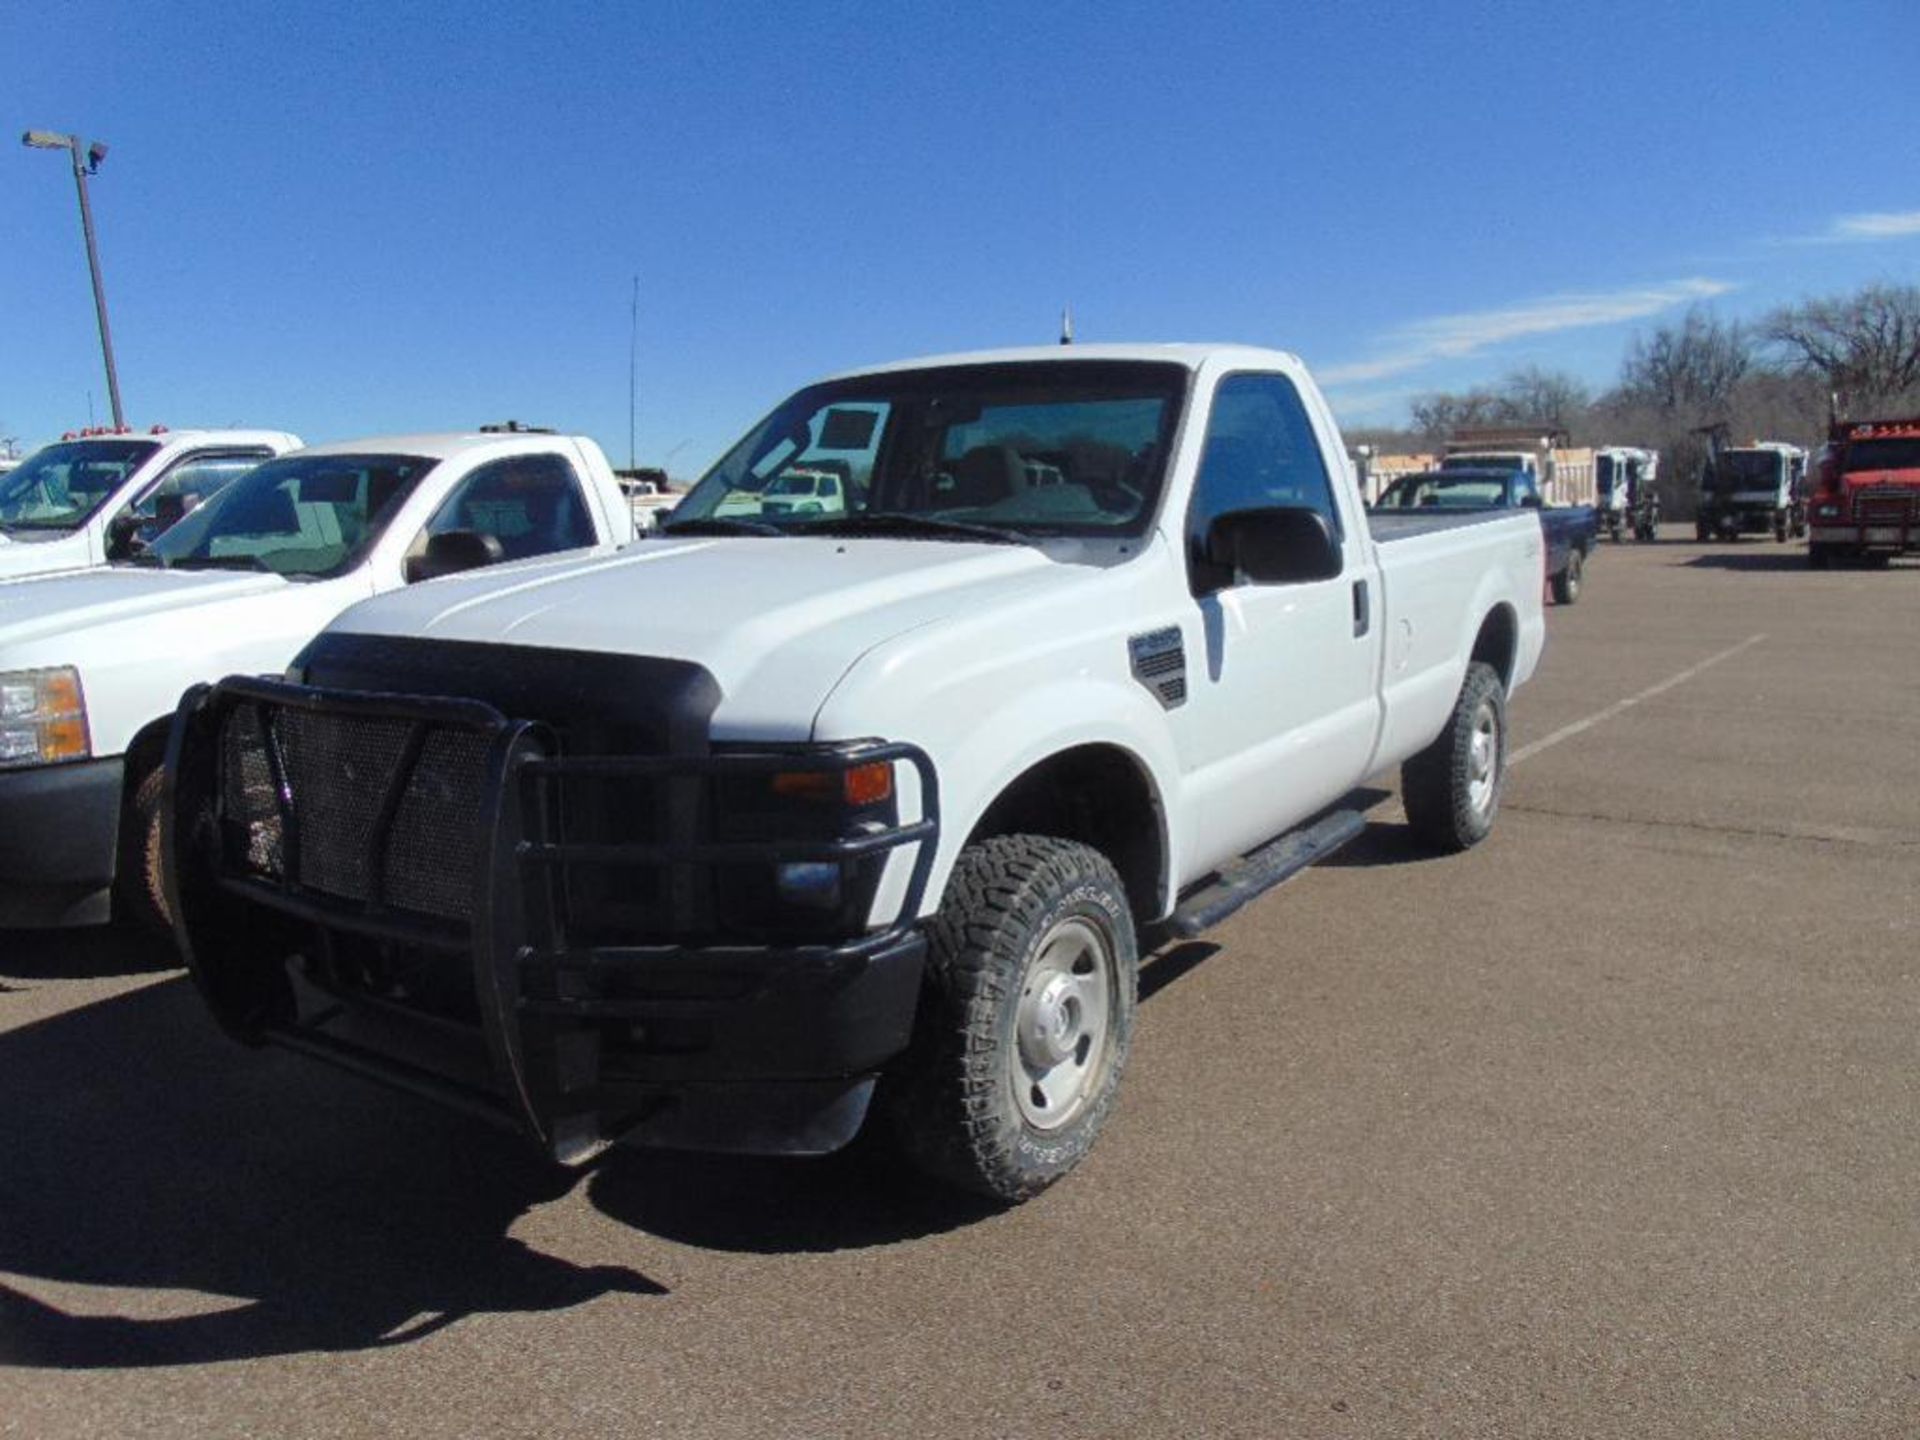 2008 Ford F250 4x4 Pickup s/n 1ftnf21568ed86285, v8 gas eng, auto trans, od reads 117592 miles,